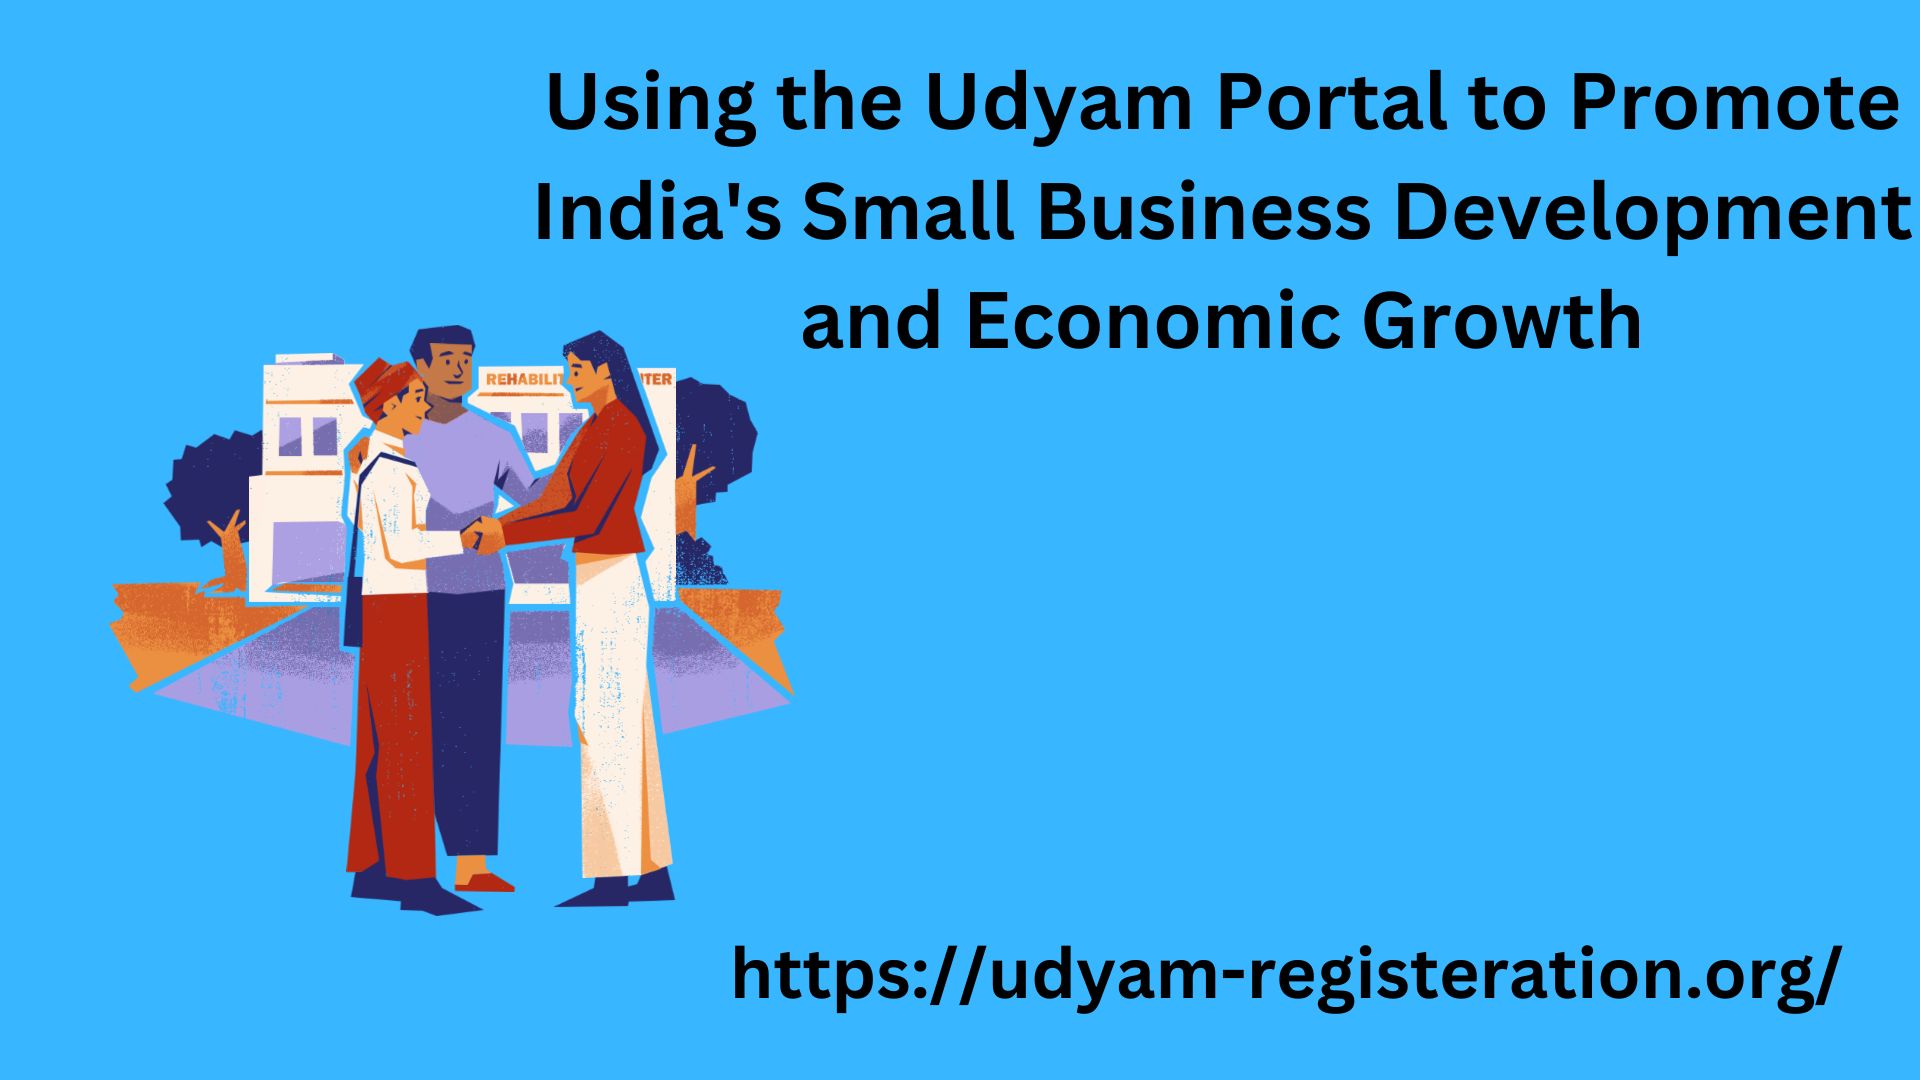 Udyam Portal to Promote Small Business and Economic Growth